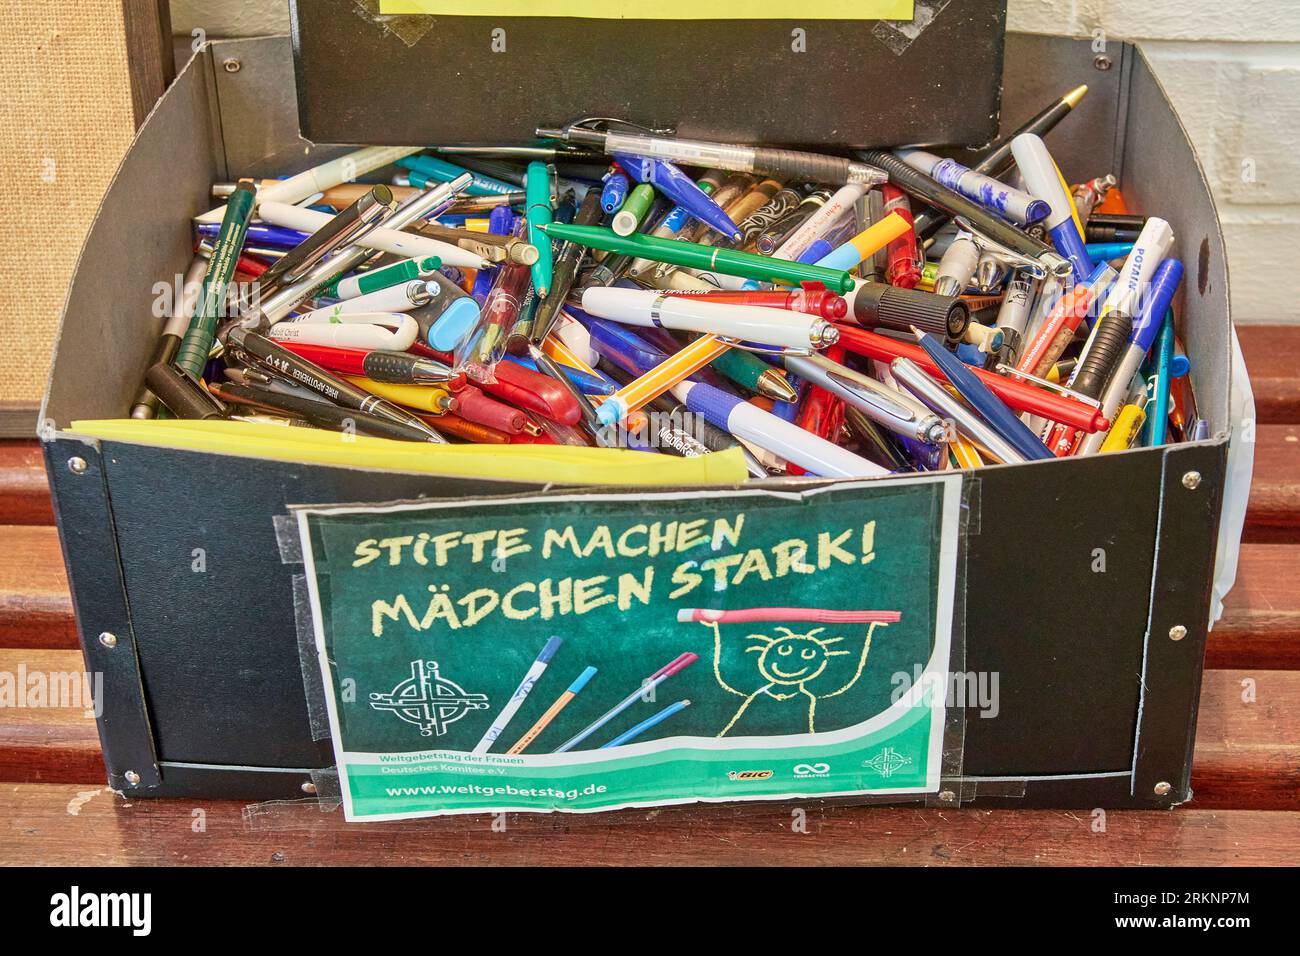 pens are collected, donation campaign for girls in Africa, Germany, Hesse Stock Photo